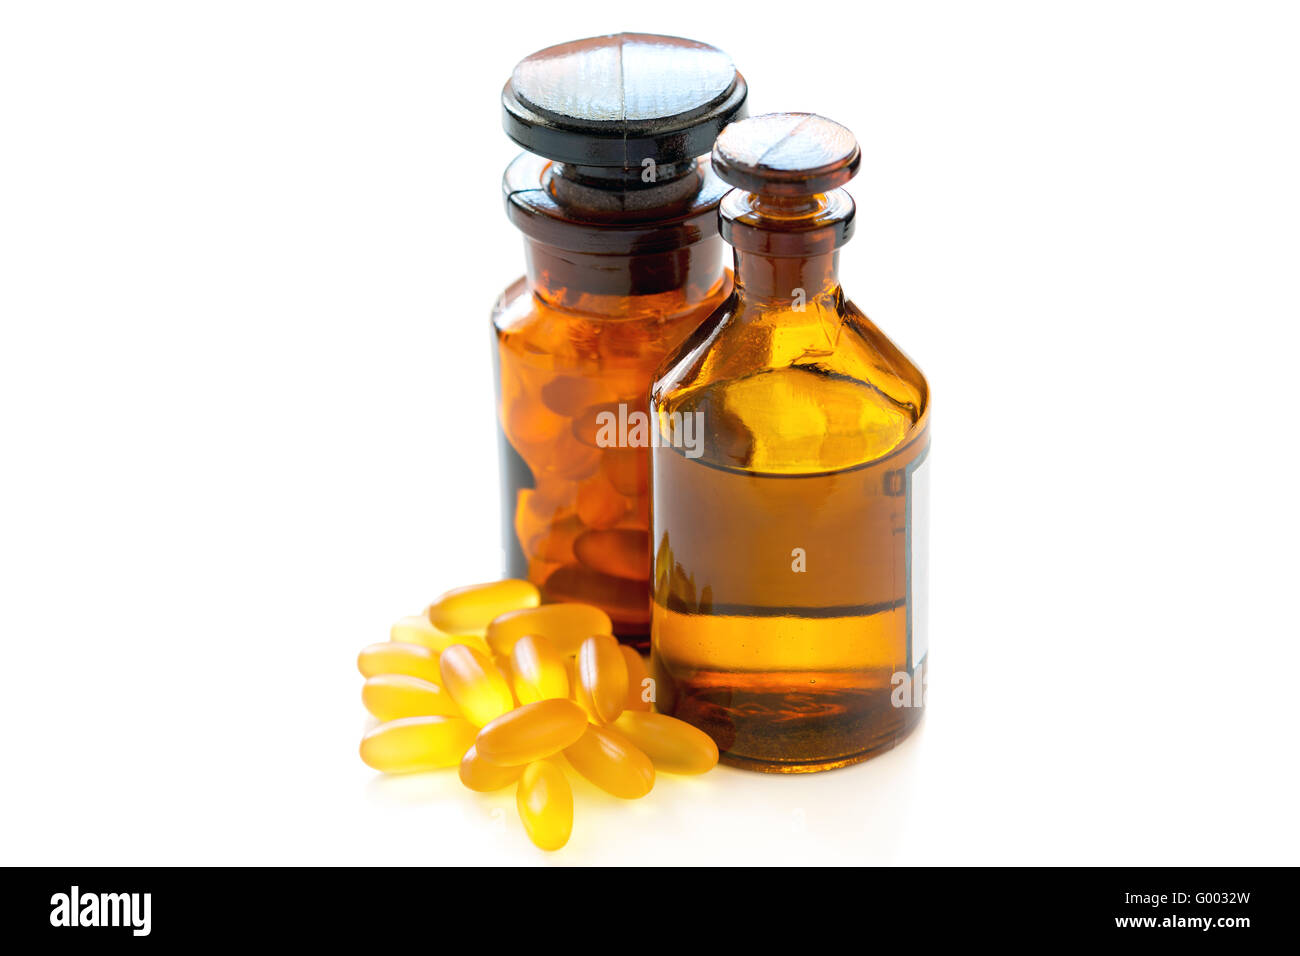 Fish oil in vial and capsules. Stock Photo